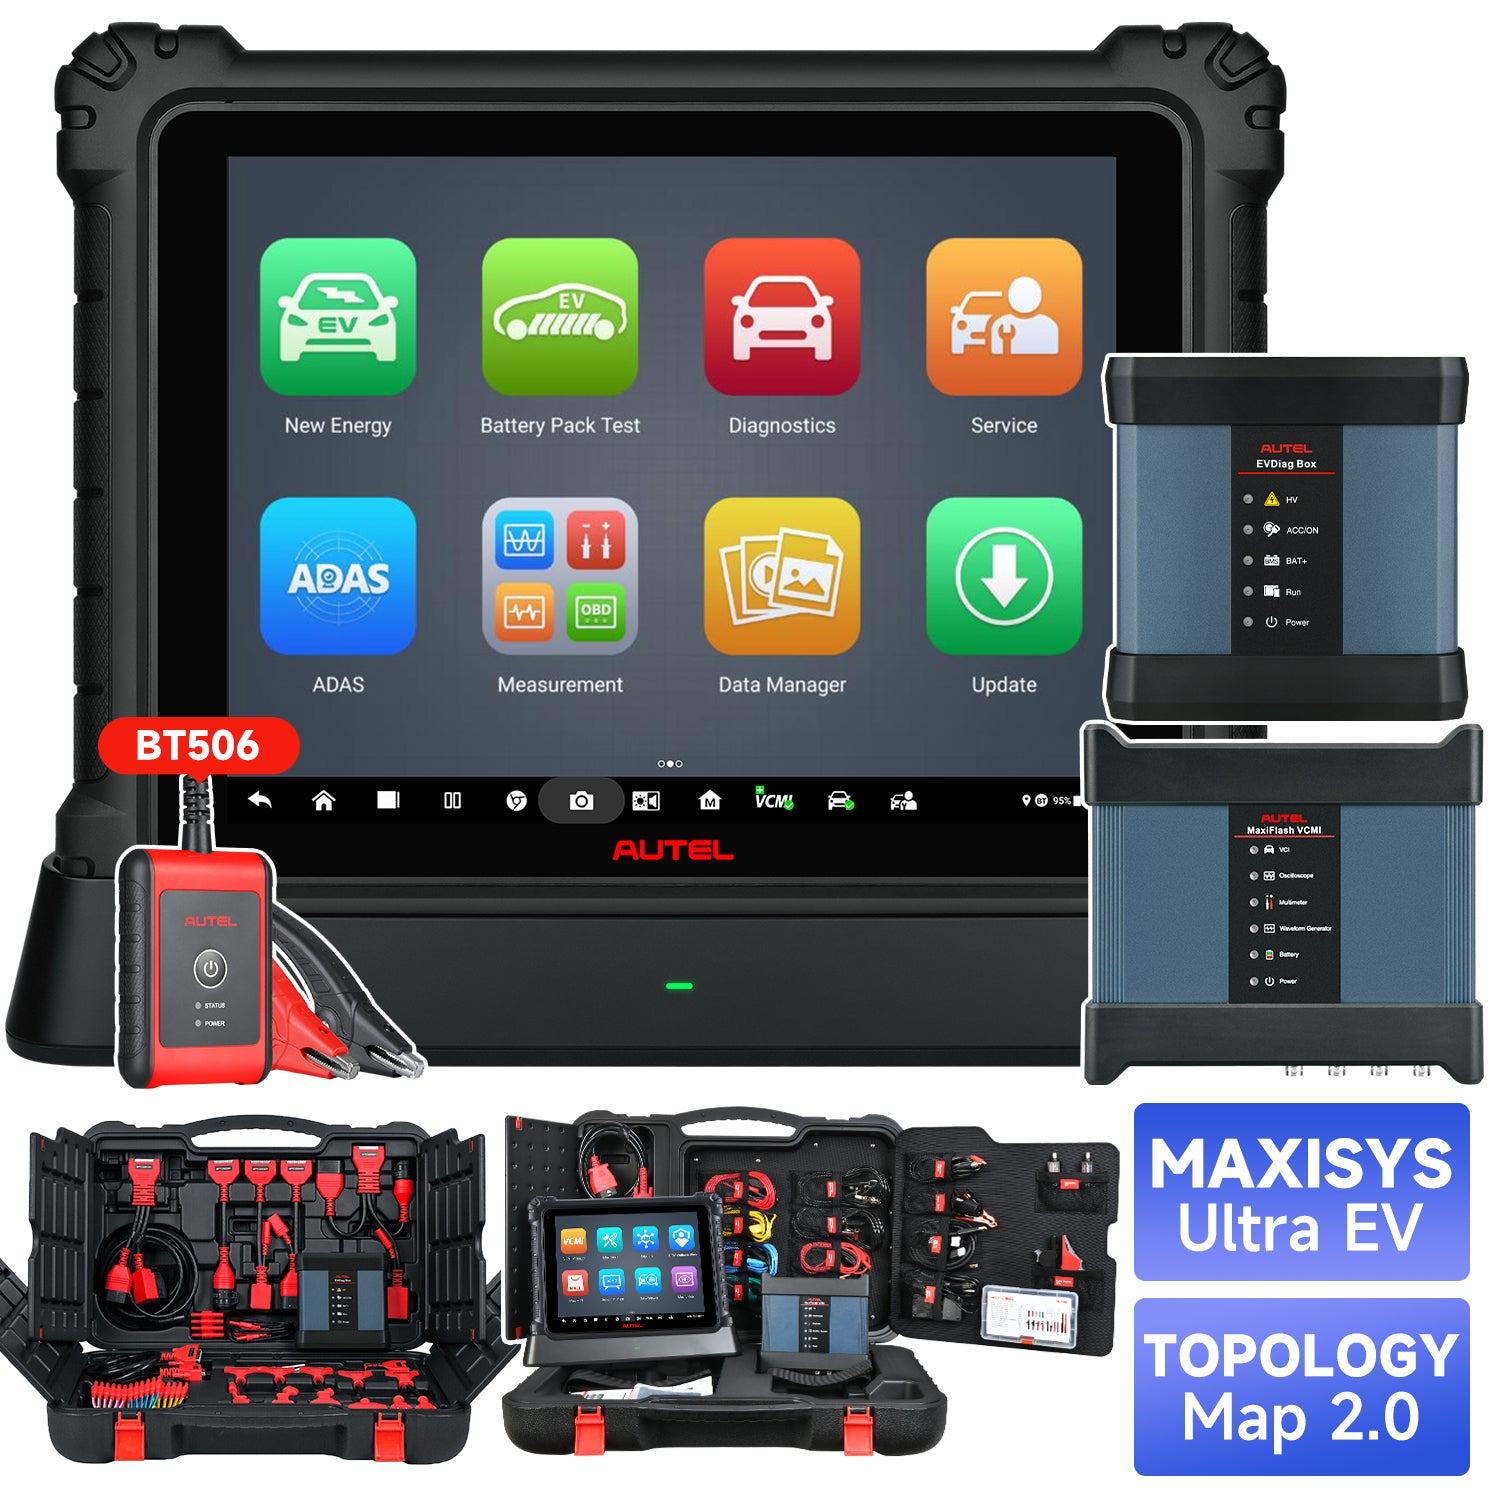 Autel Maxisys Ultra EV and BT506